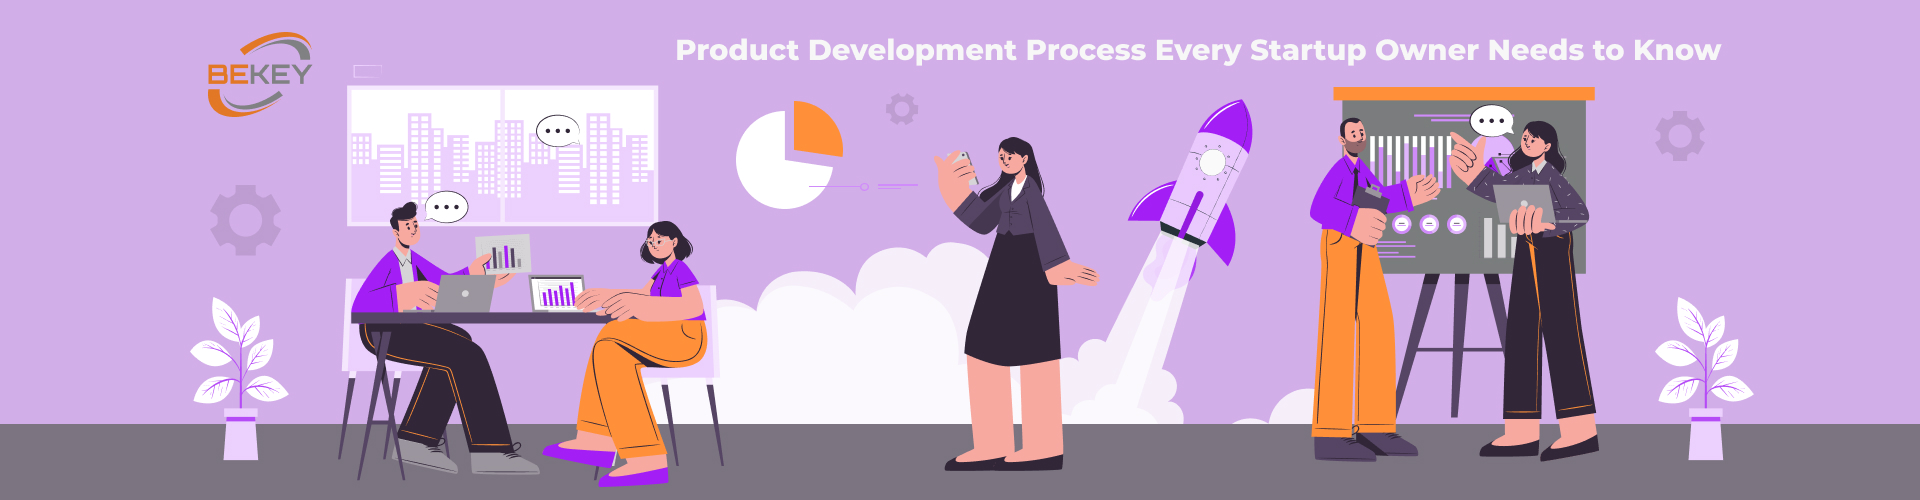 Product development process every startup owner needs to know